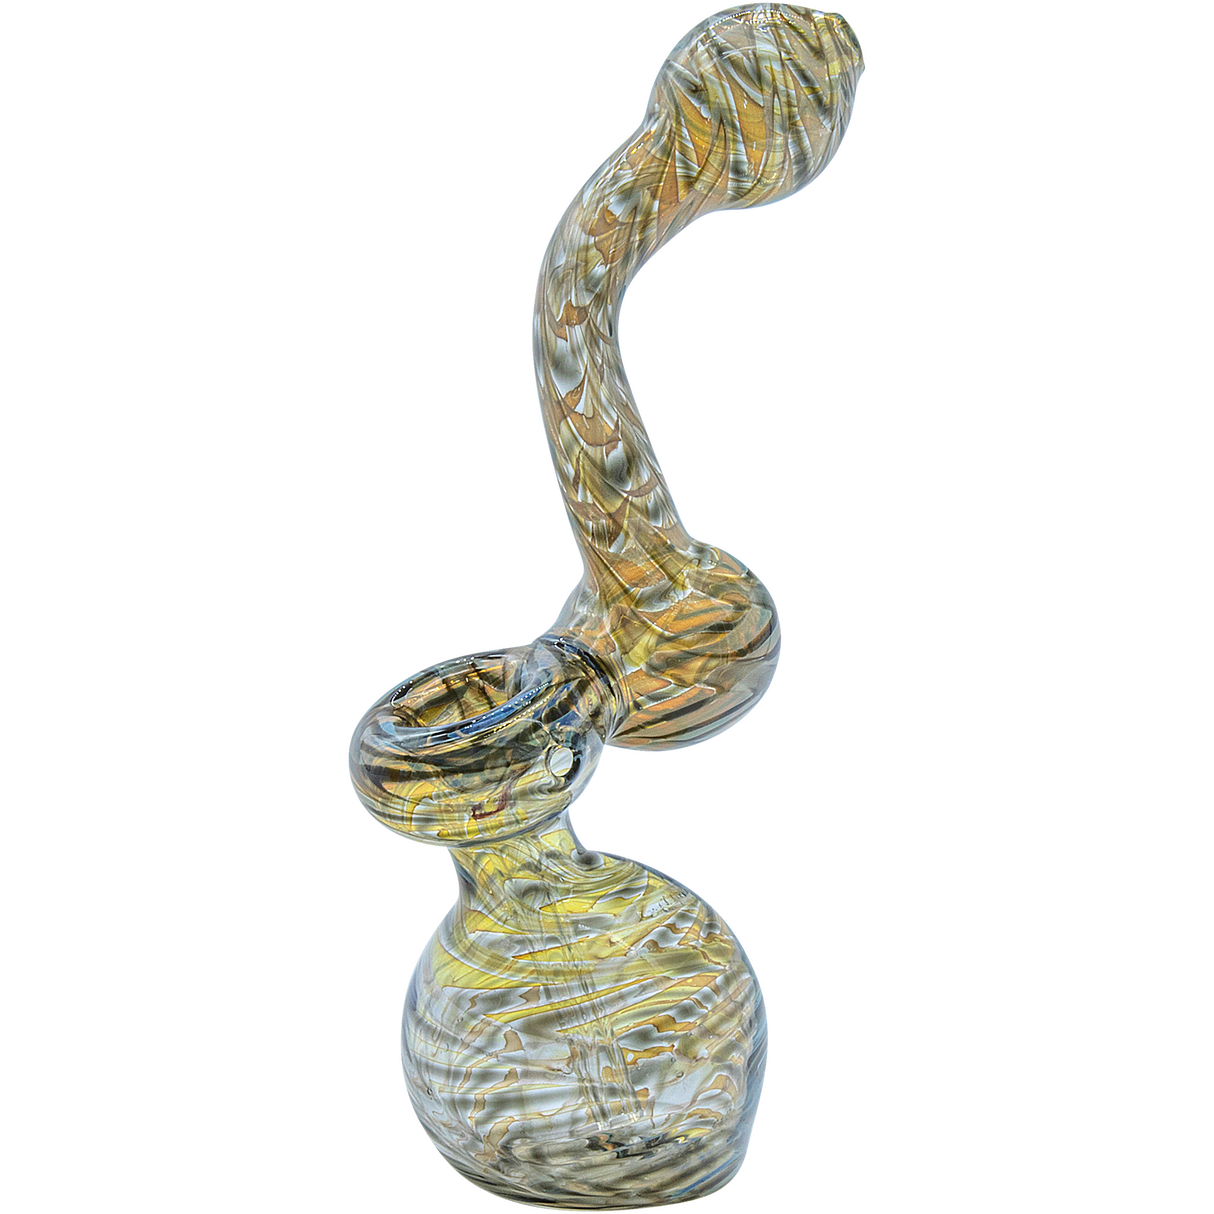 LA Pipes Color Raked Fumed Sherlock Bubbler Pipe in Black Onyx, Angled View on White Background